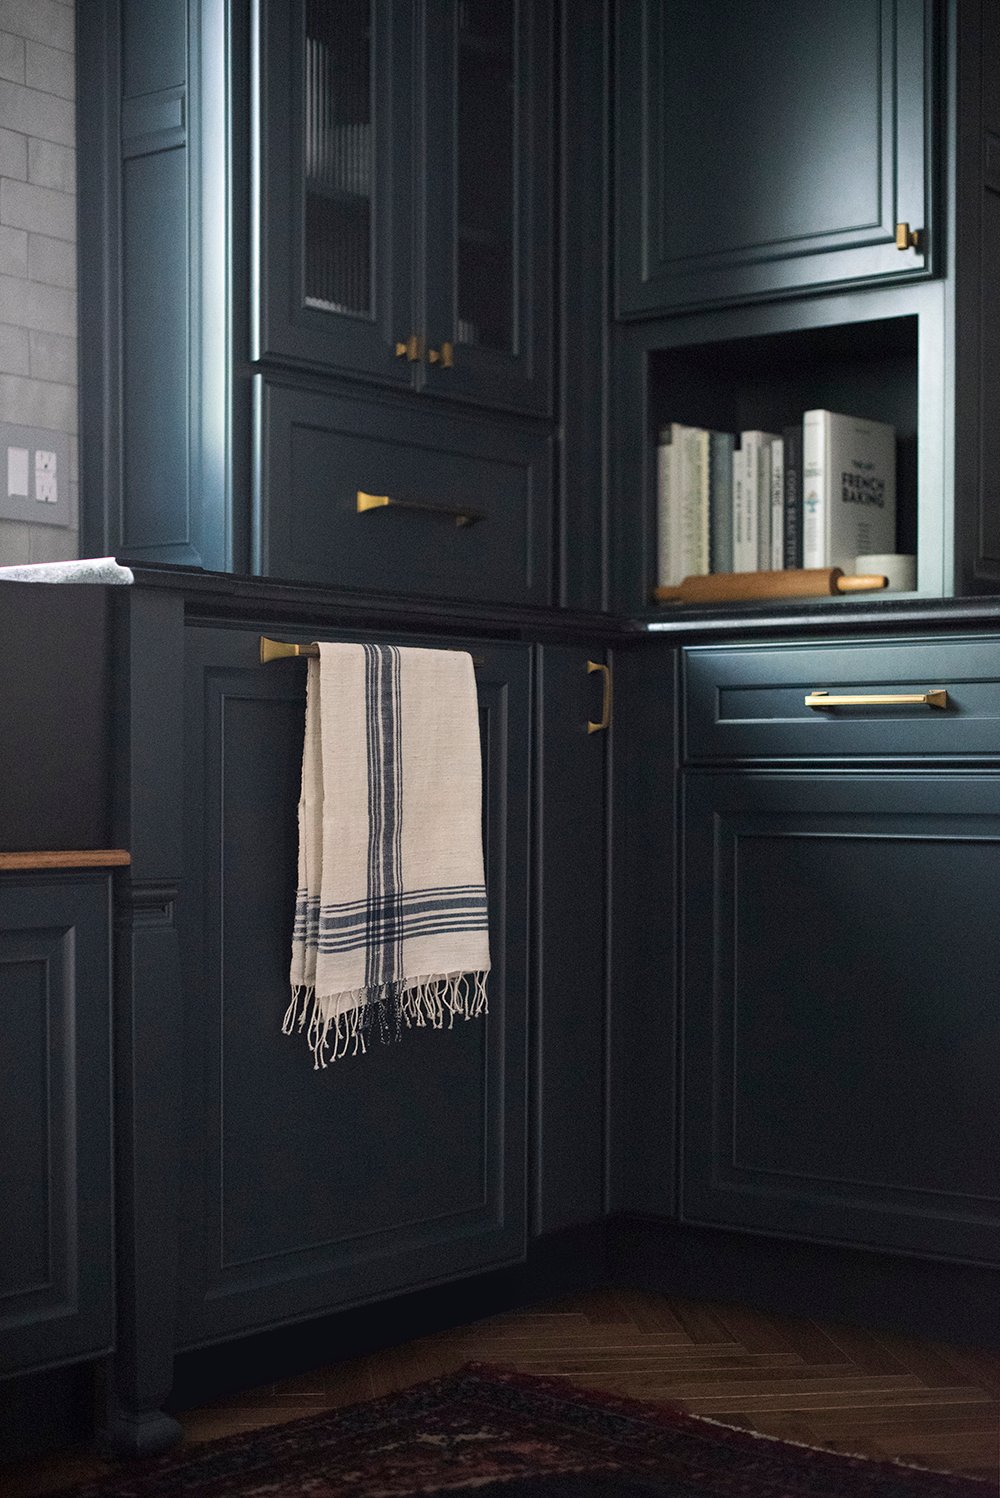 Our Dark & Moody Kitchen Reveal - roomfortuesday.com